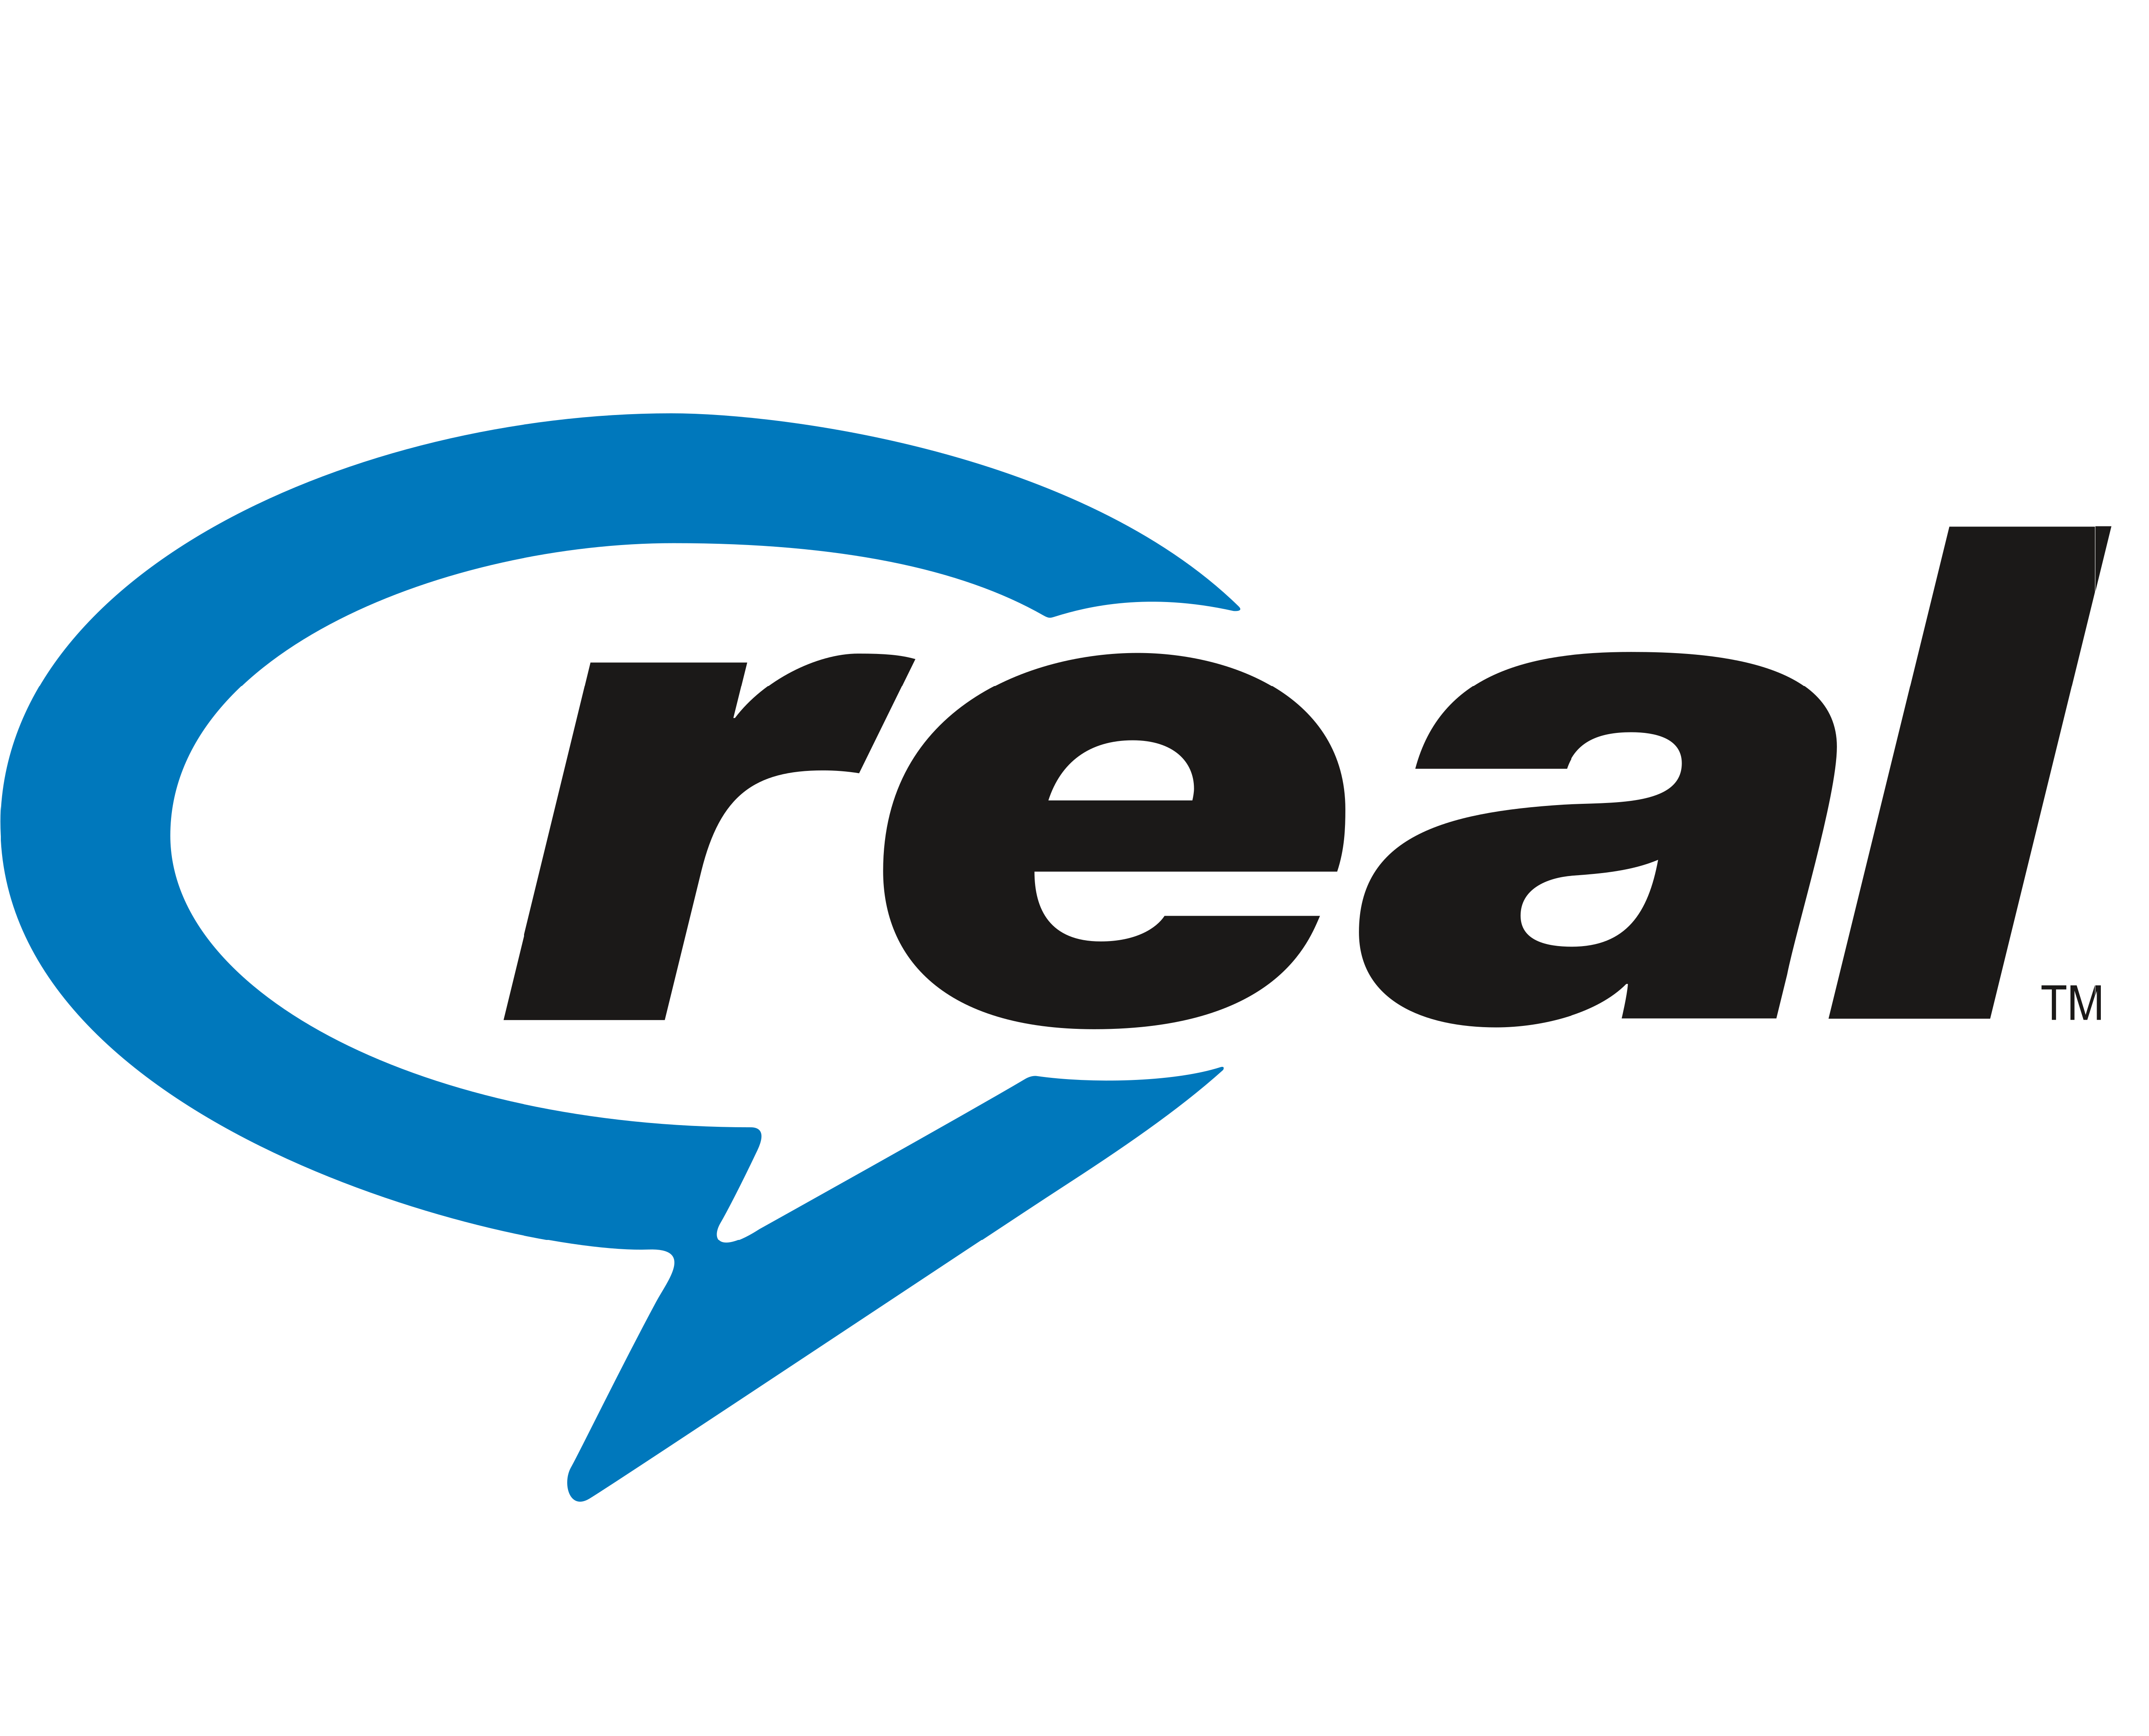 realplayer download for windows 10